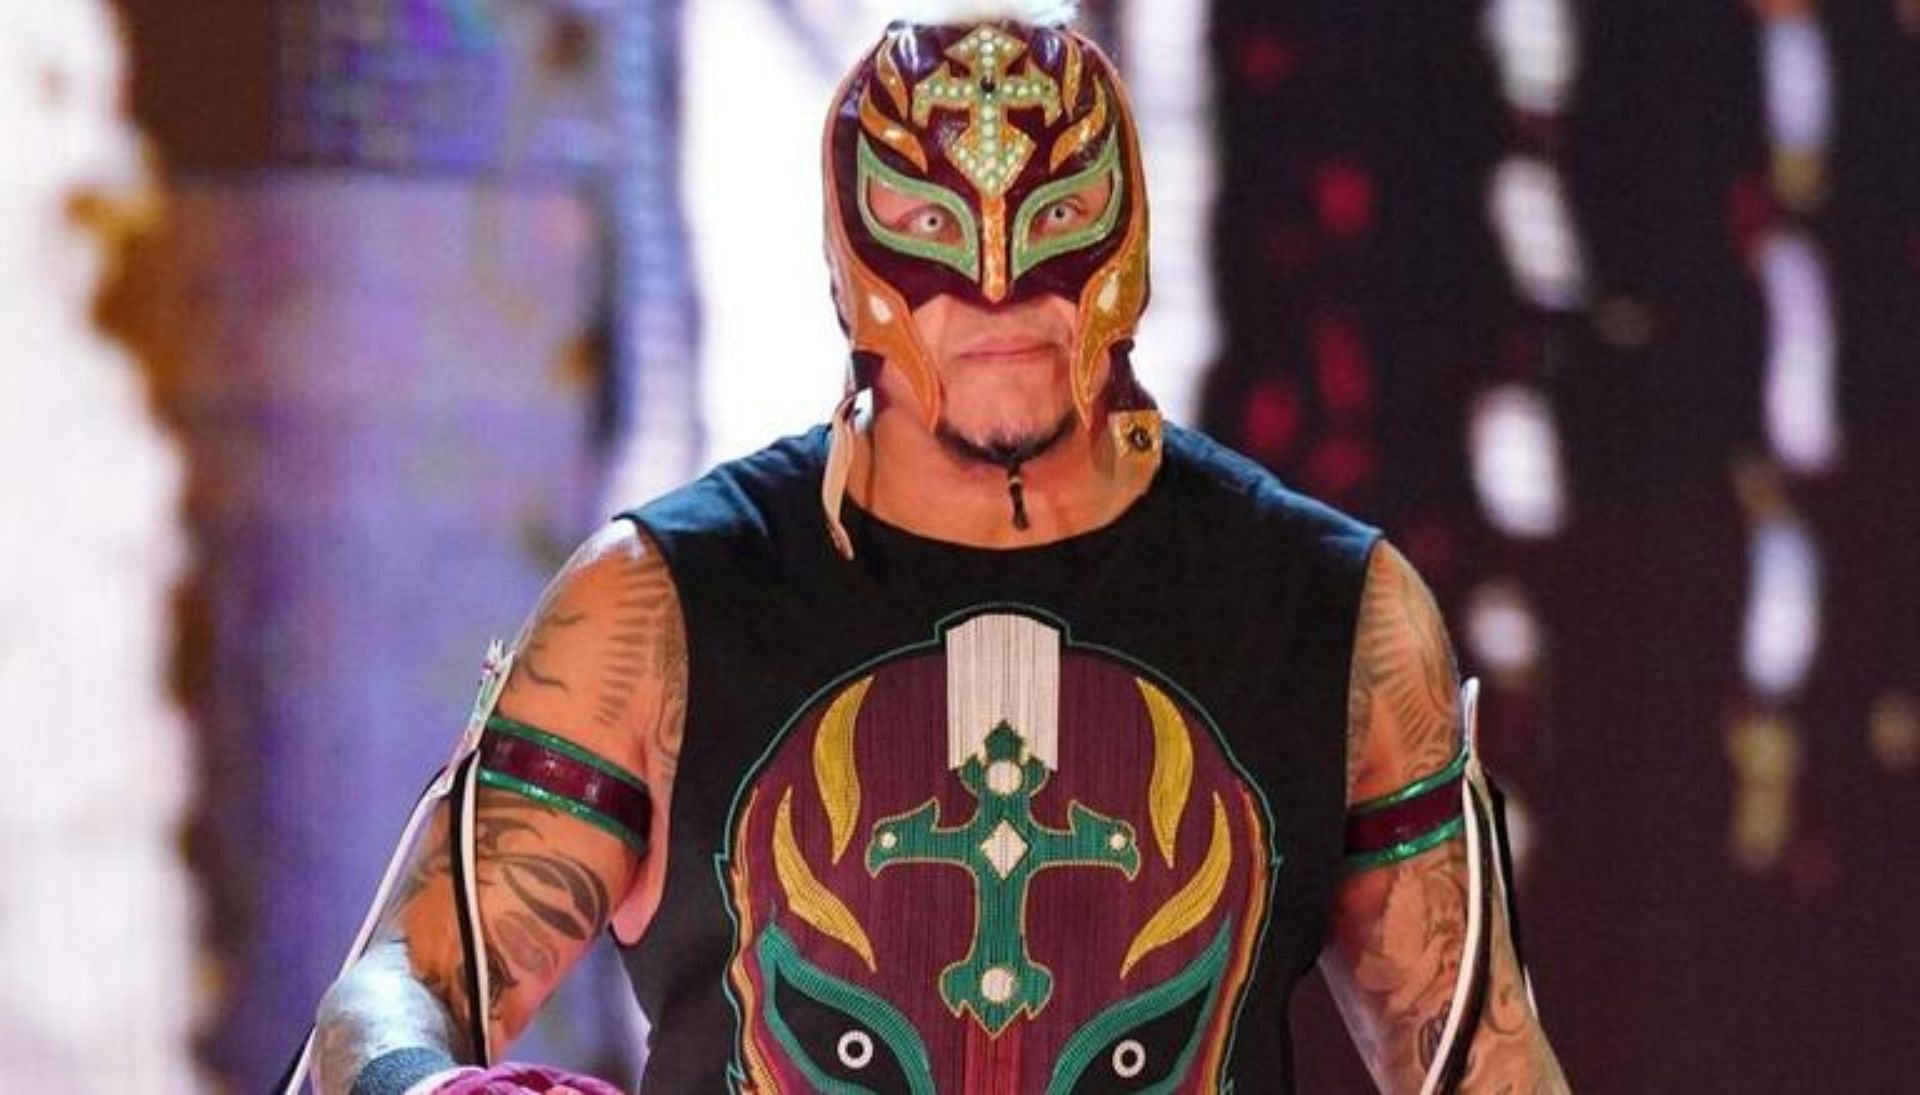 Rey Mysterio will face The Miz at Elimination Chamber.